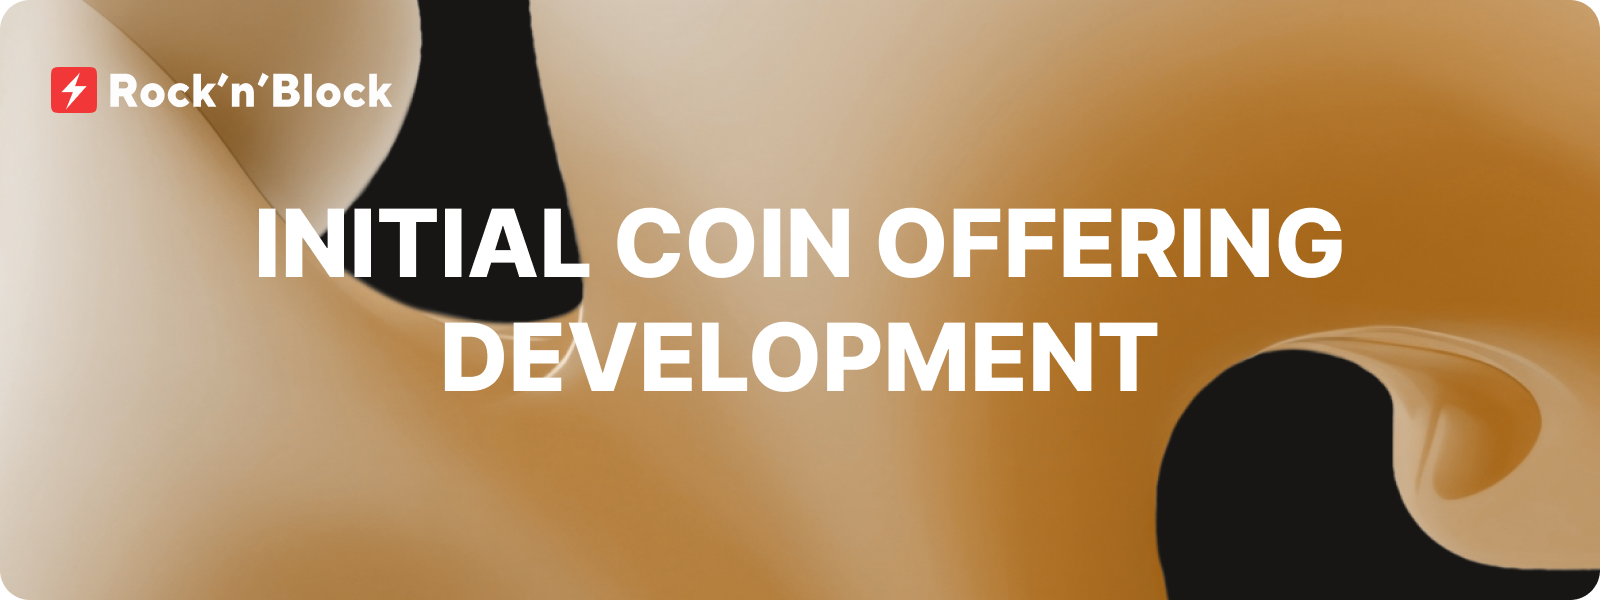 Initial Coin Offering Development